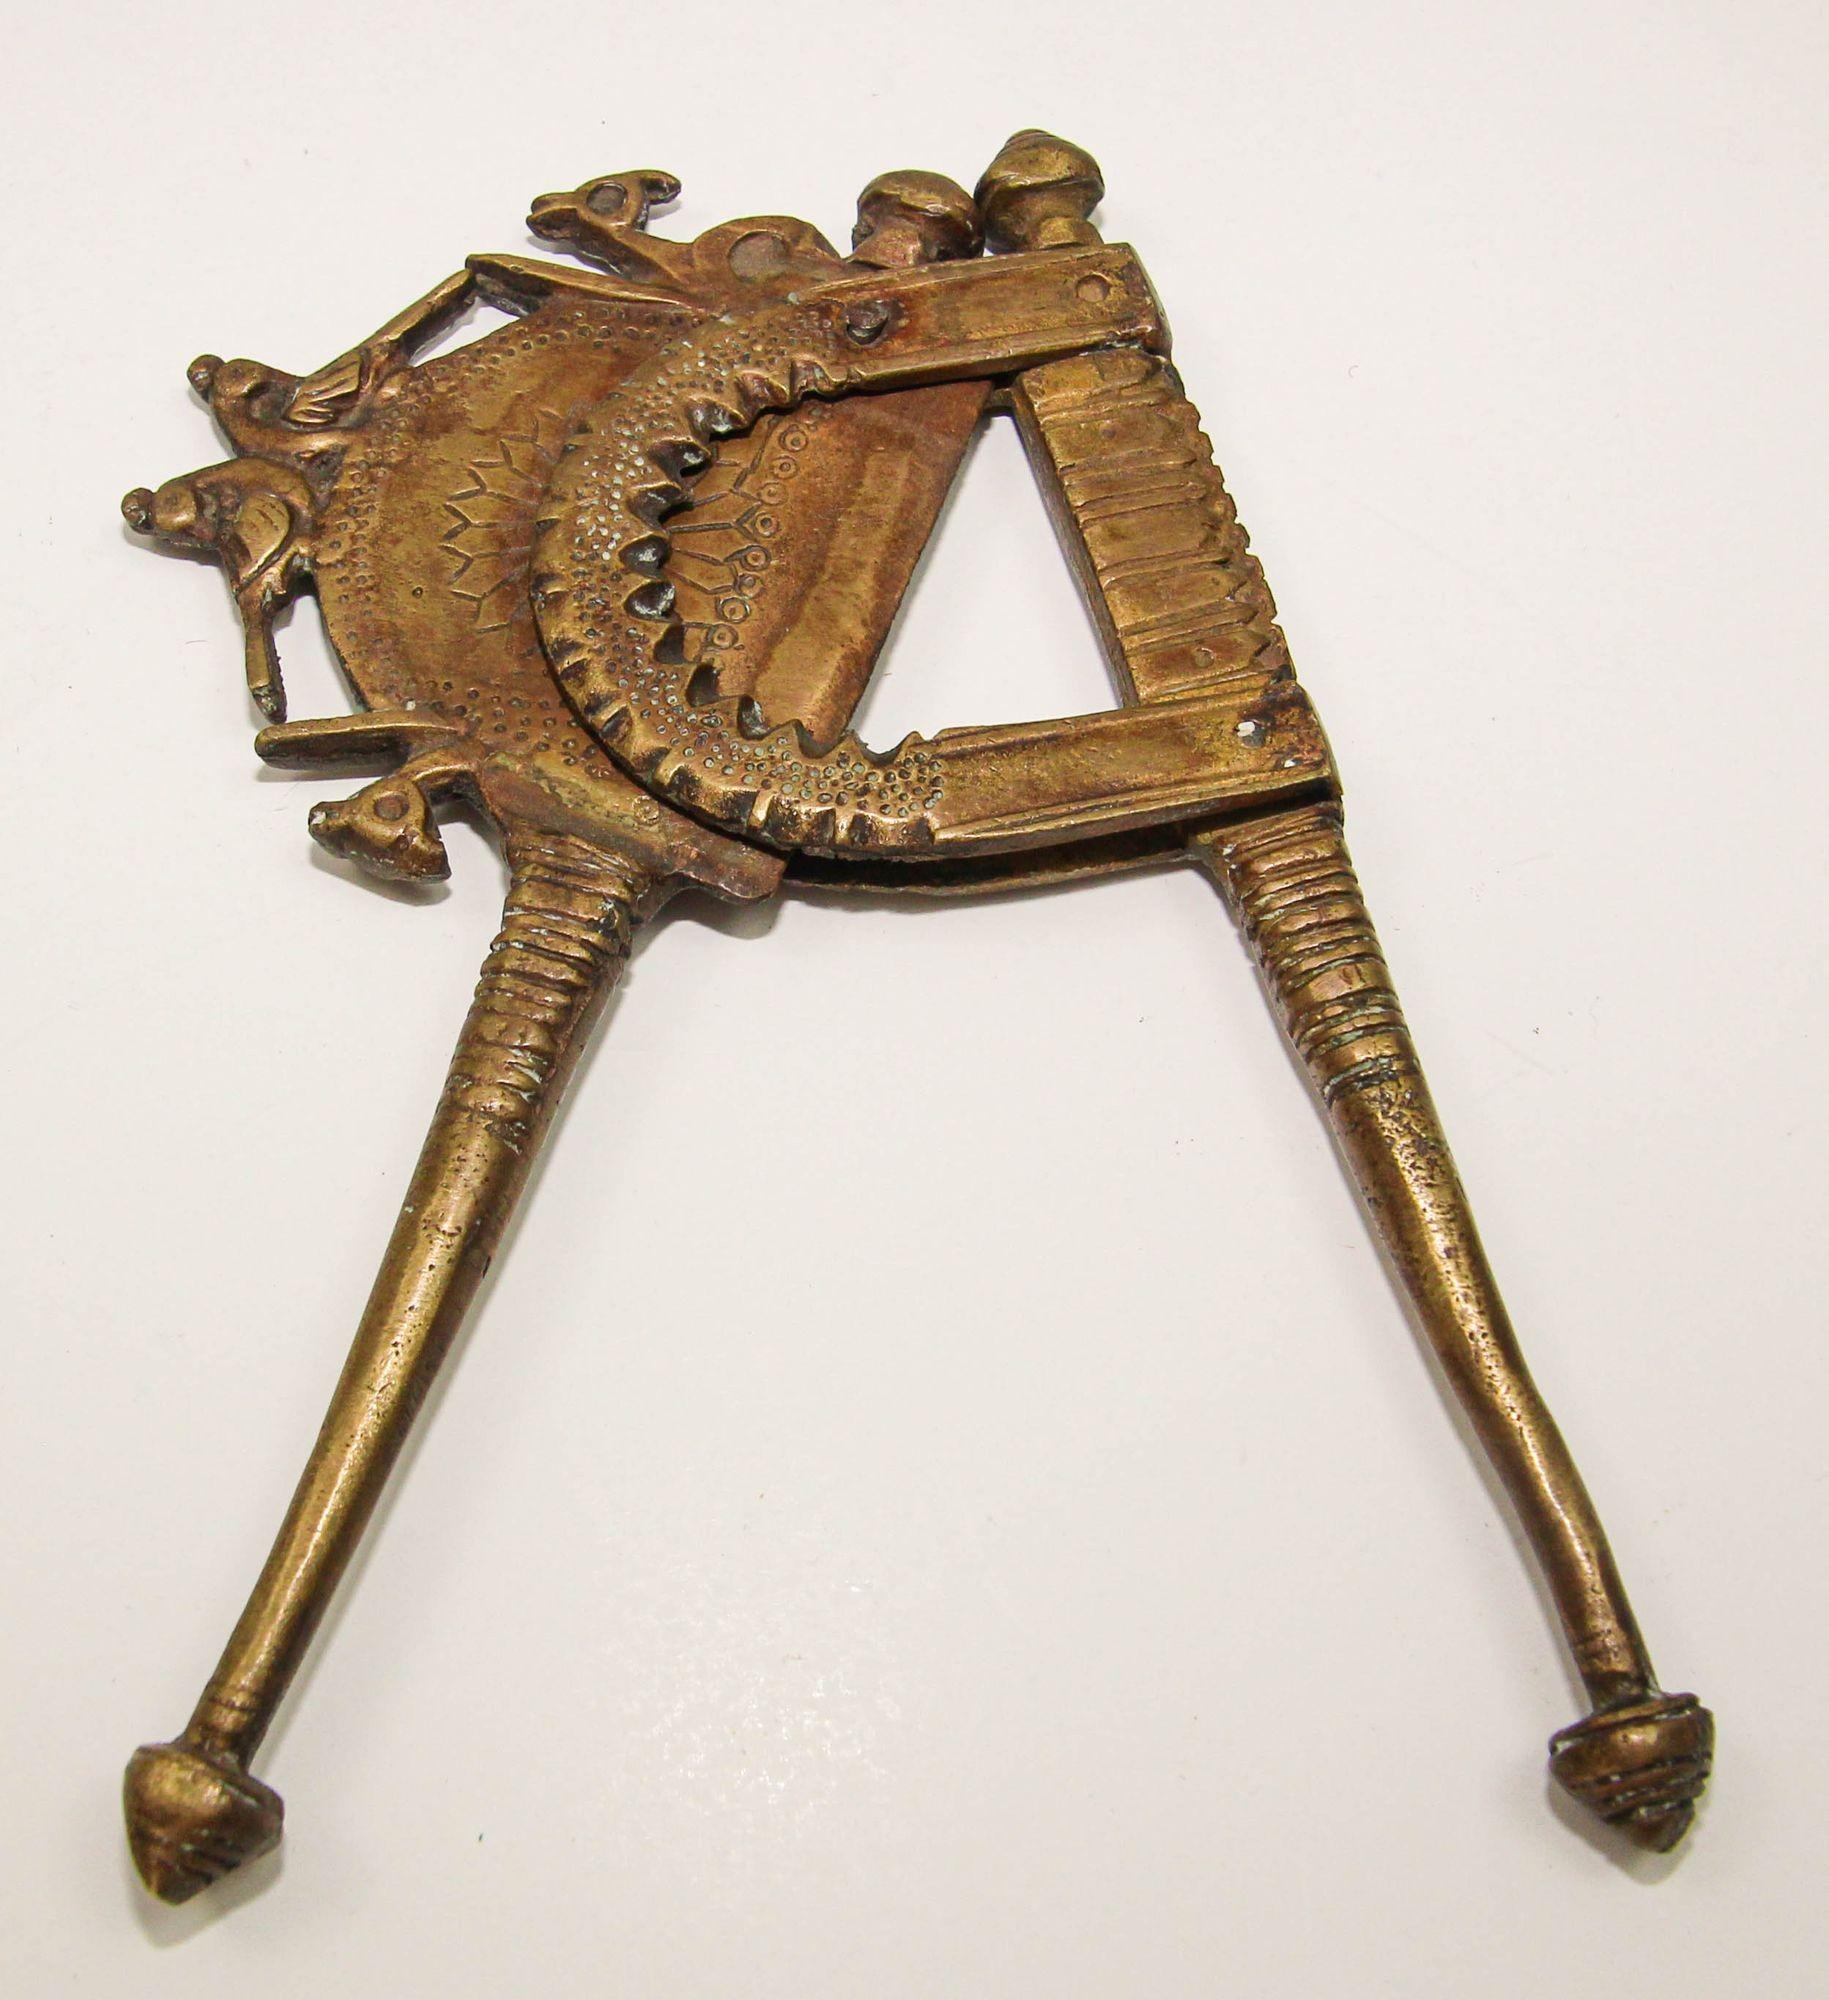 Bronze Antique 19th C. Brass Betel Nut Cutter from India Collectible Asian Artifact For Sale